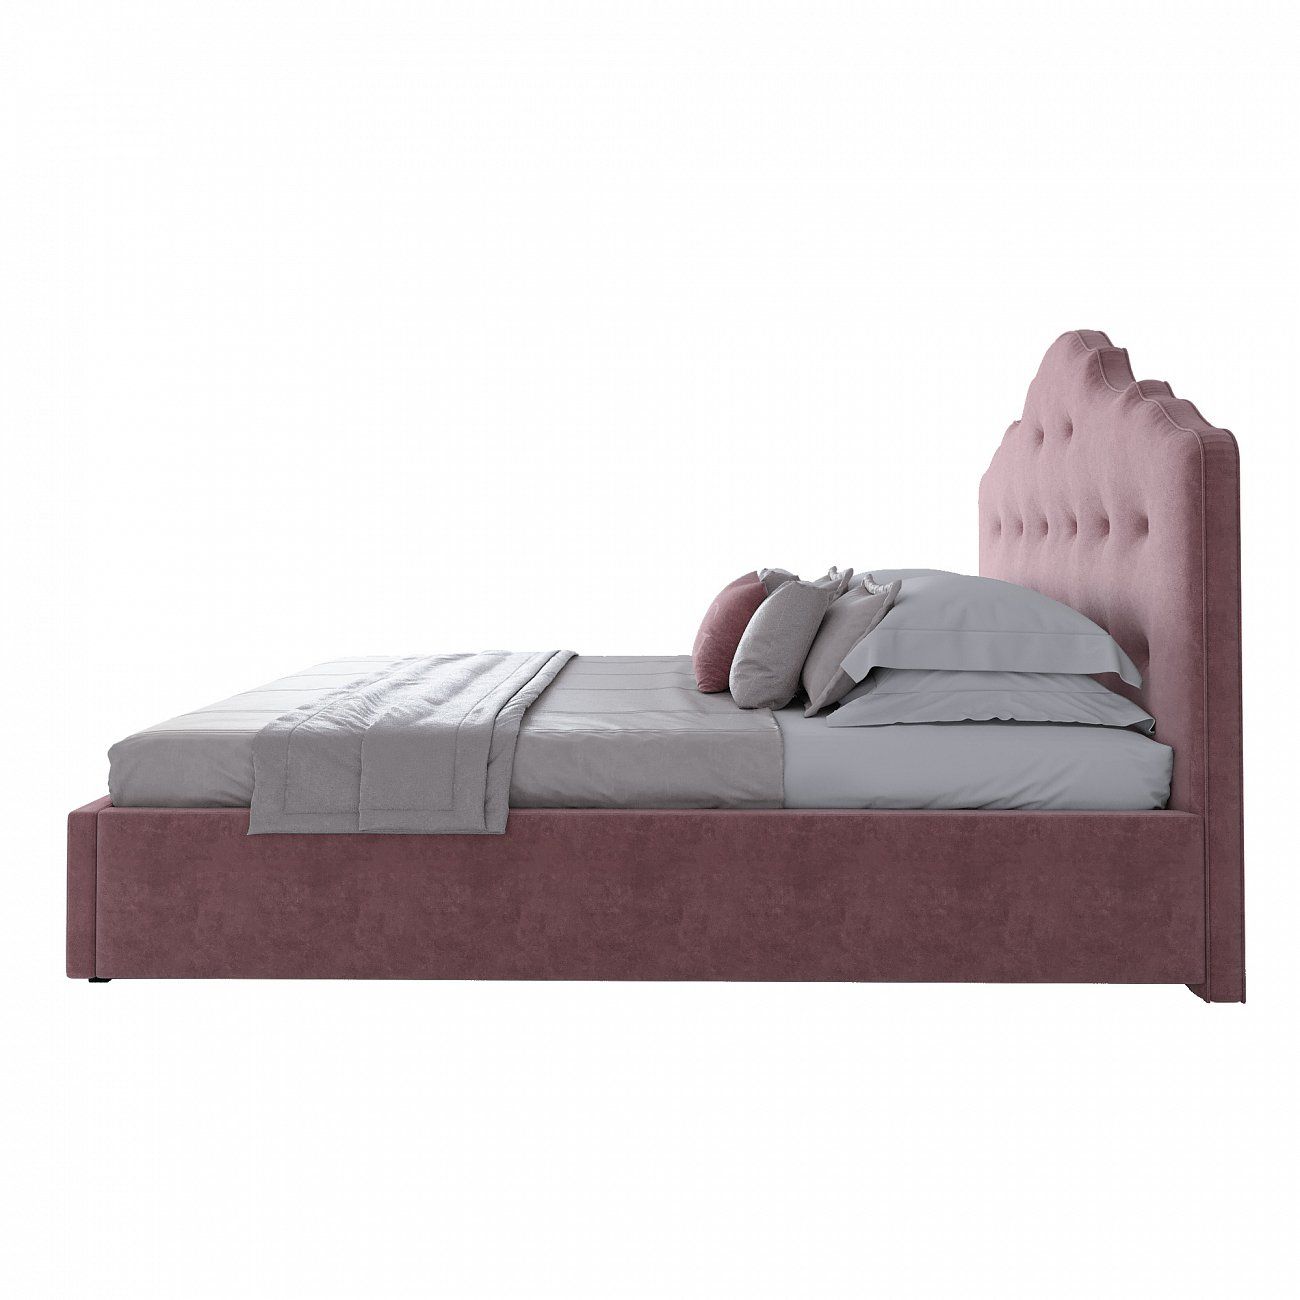 Double bed 180x200 cm Dusty Rose Palace